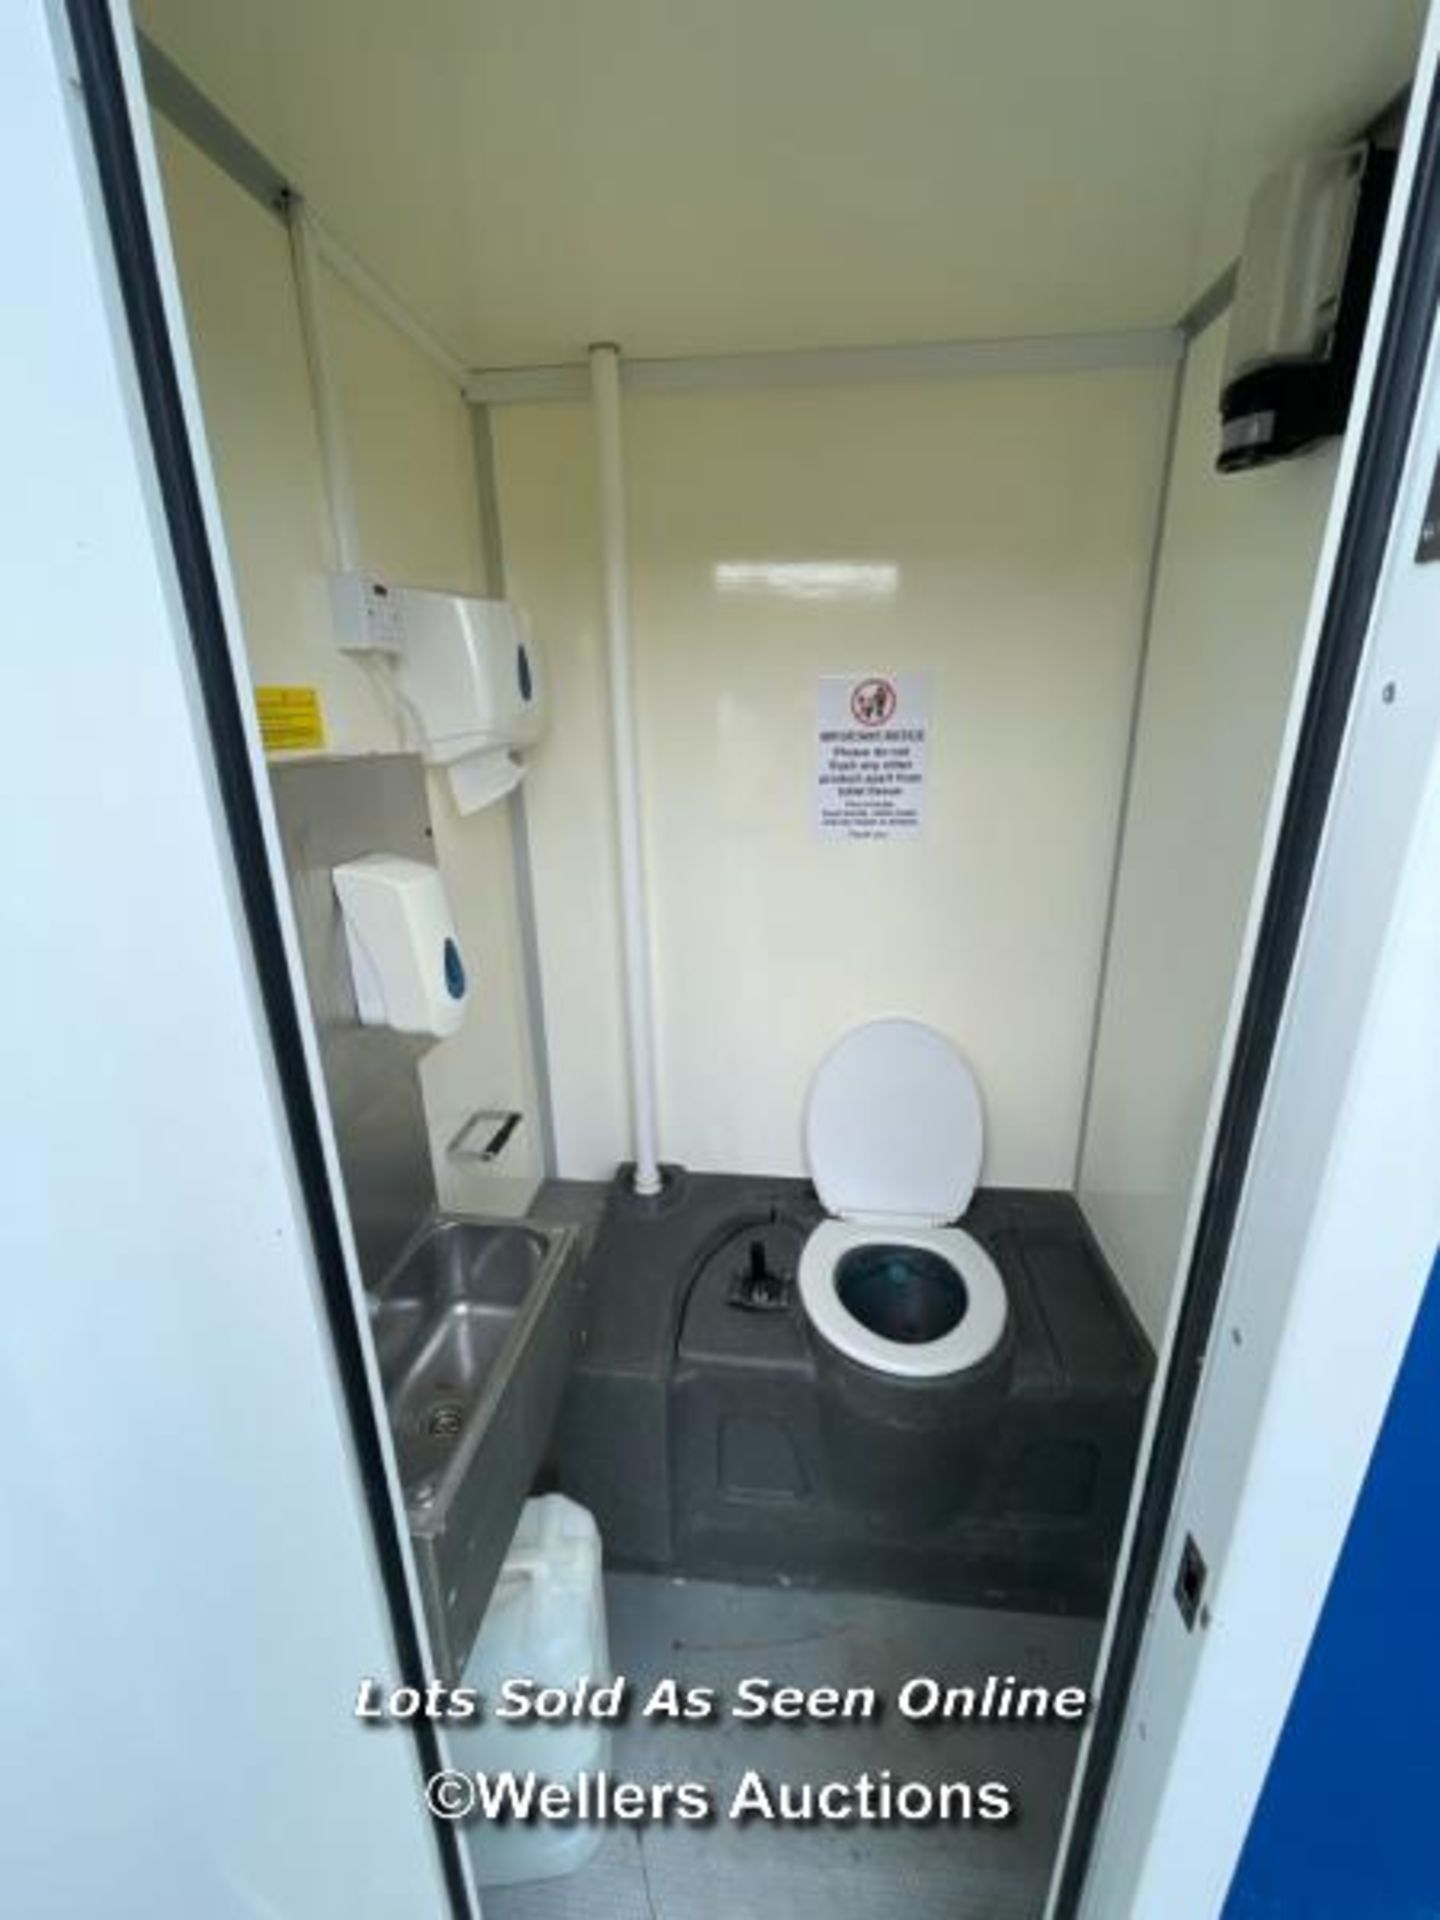 6 PERSON 12 X 7.5FT AJC EASY CABIN TOWABLE WELFARE UNIT, INCLUDES WASH BASIN, KETTLE, MICROWAVE, - Image 12 of 20